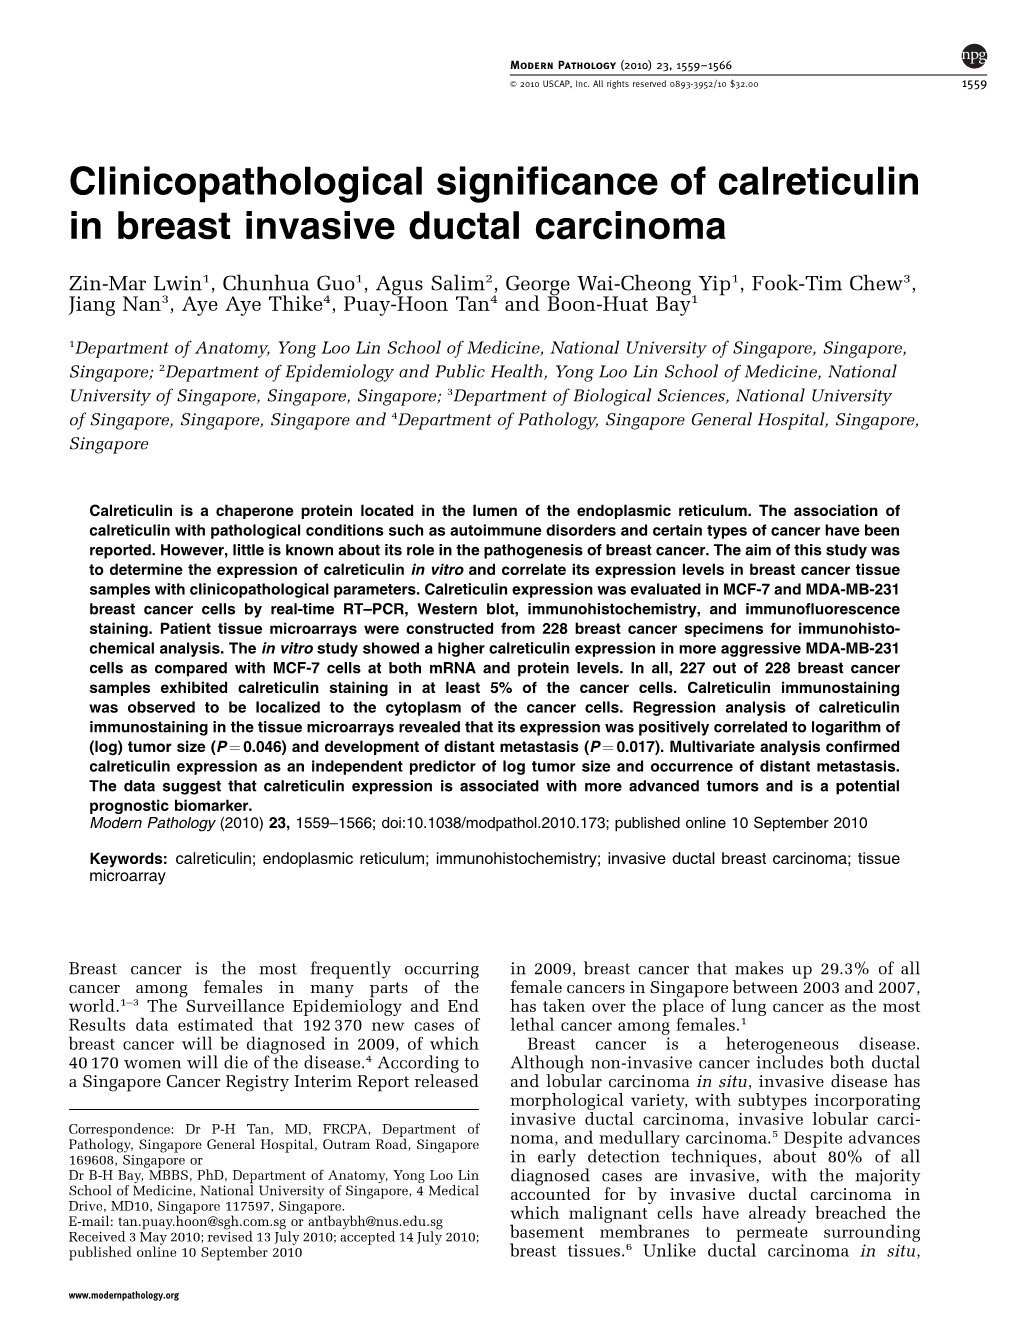 Clinicopathological Significance of Calreticulin in Breast Invasive Ductal Carcinoma